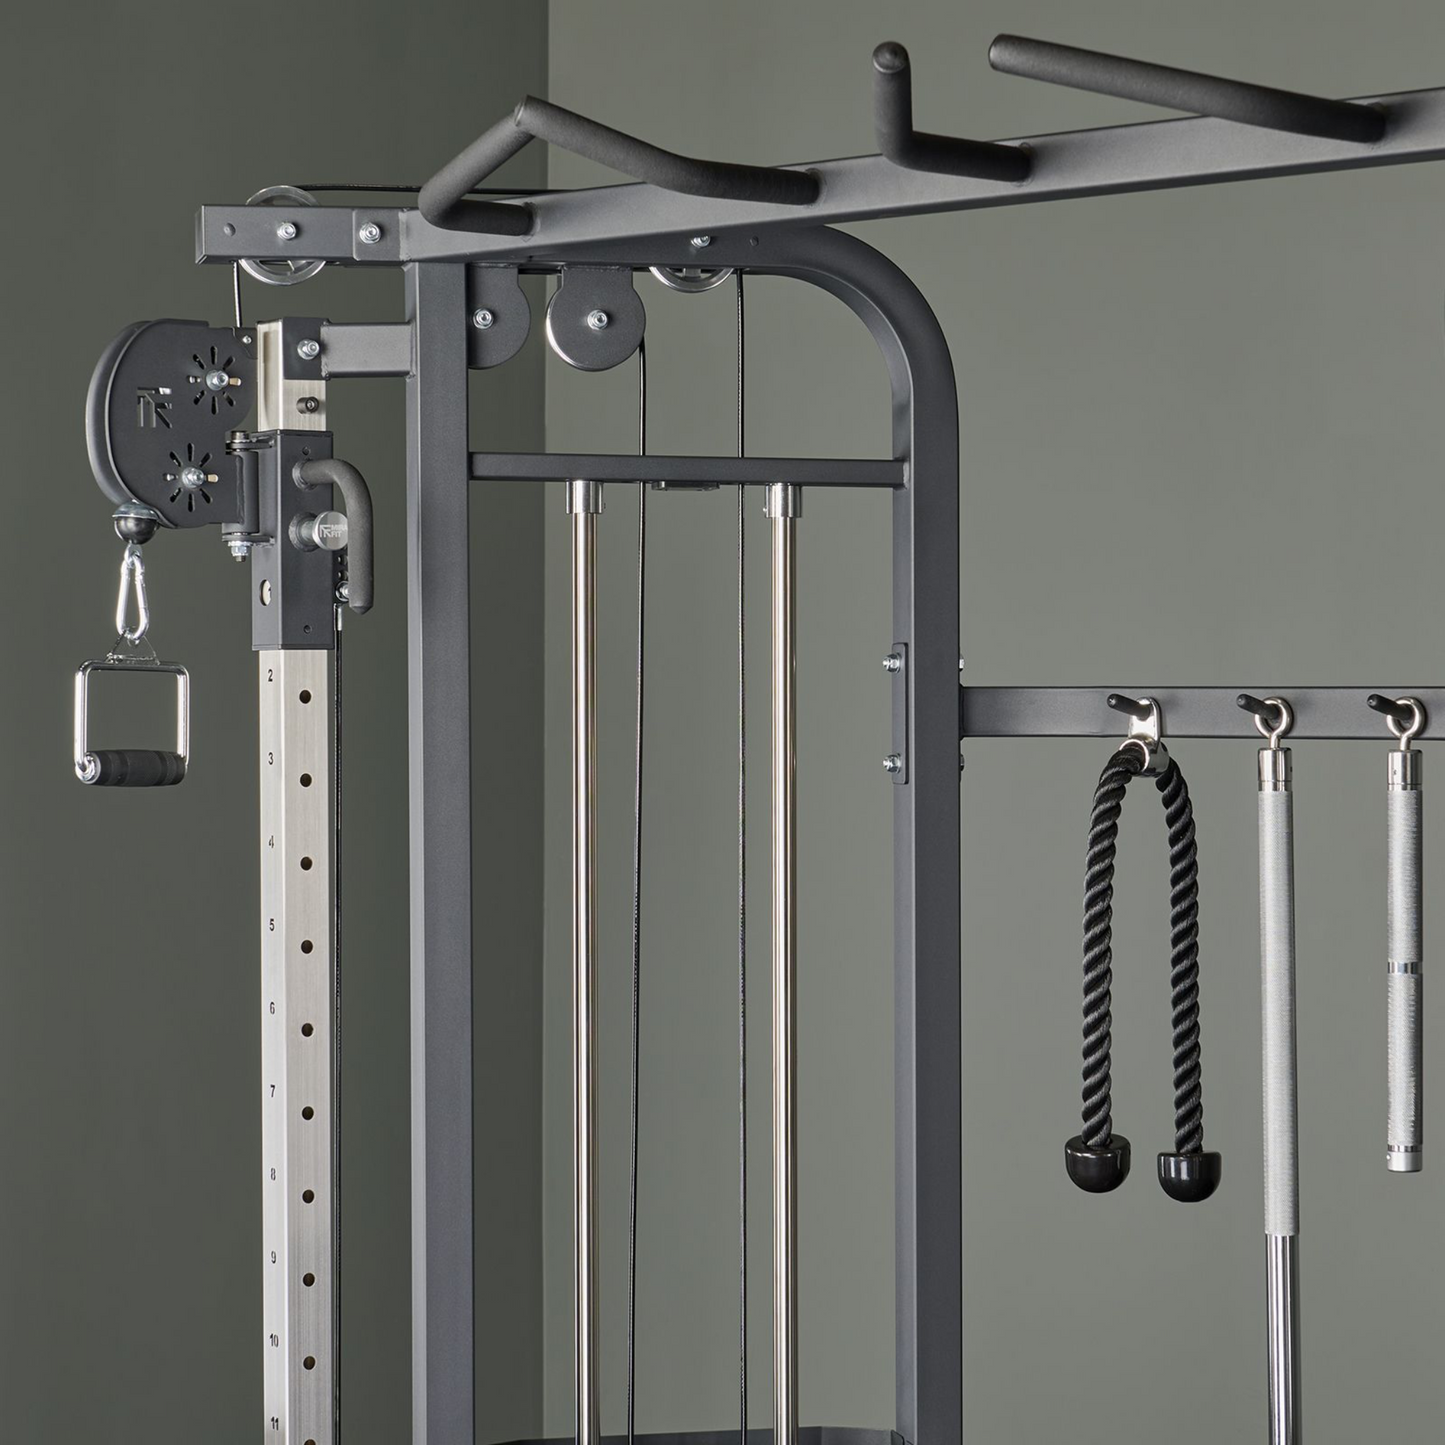 Mirafit M4 Functional Trainer With Weight Stacks